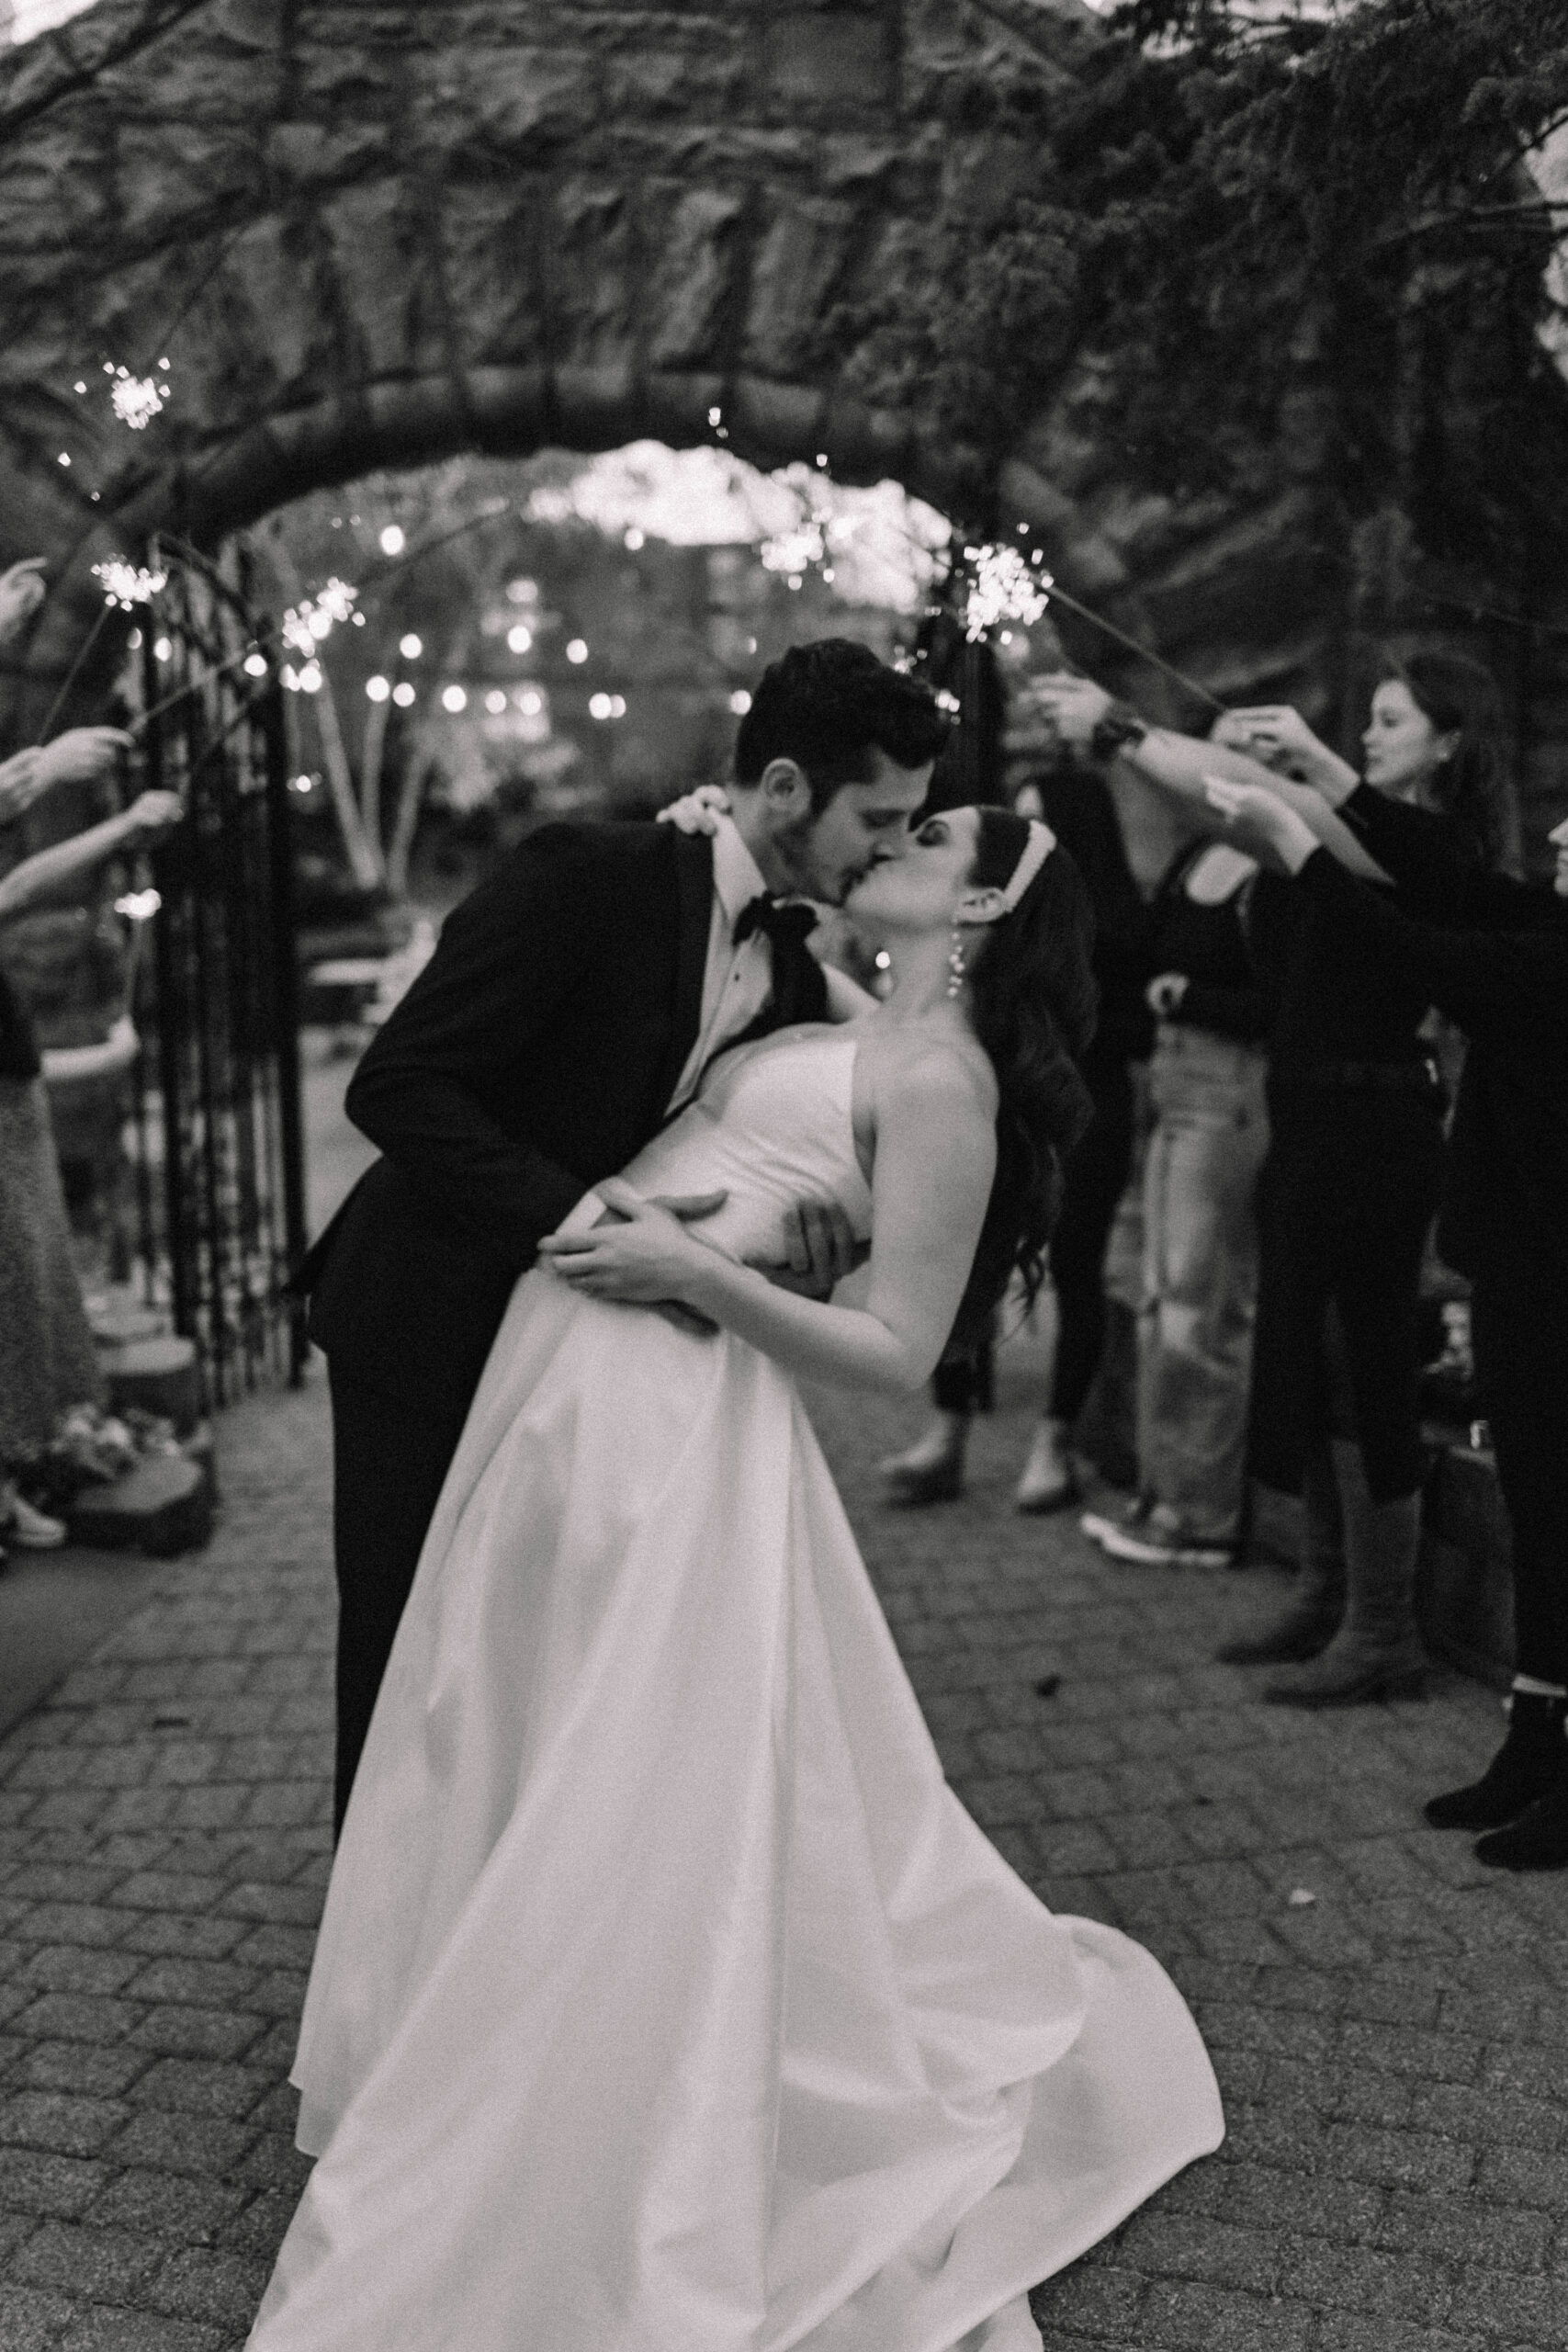 A bride and groom dip kissing below a stone archway. They are surrounded by smiling guests holding sparklers. The bride is in a white gown, and the groom is in a black tuxedo at the van dusen mansion